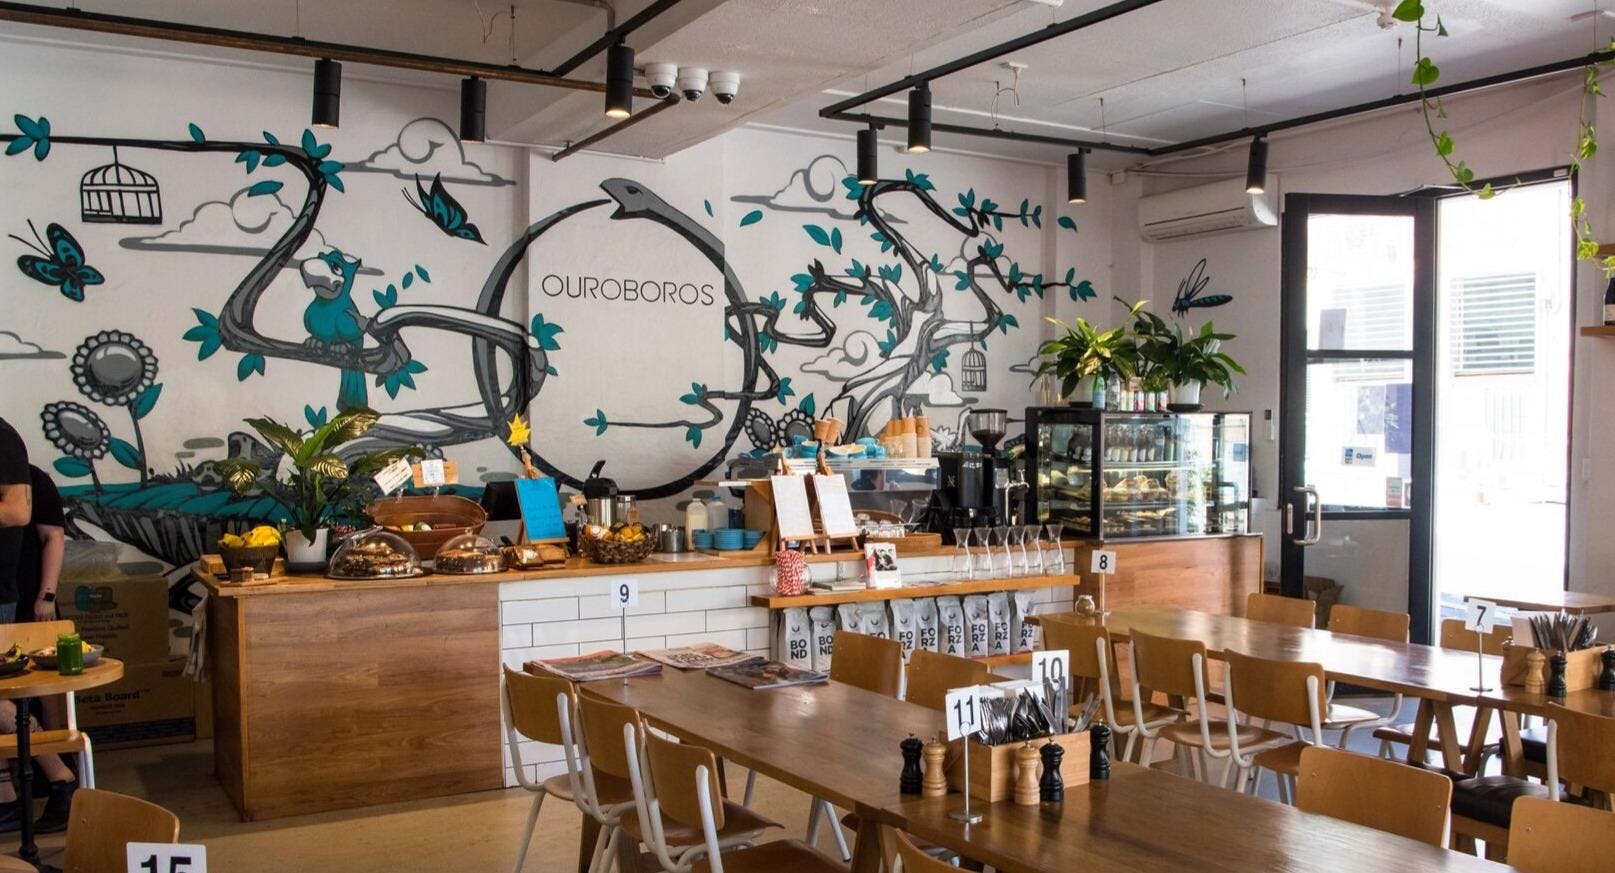 Photo of restaurant Ouroboros Wholefoods Cafe in Surry Hills, Sydney